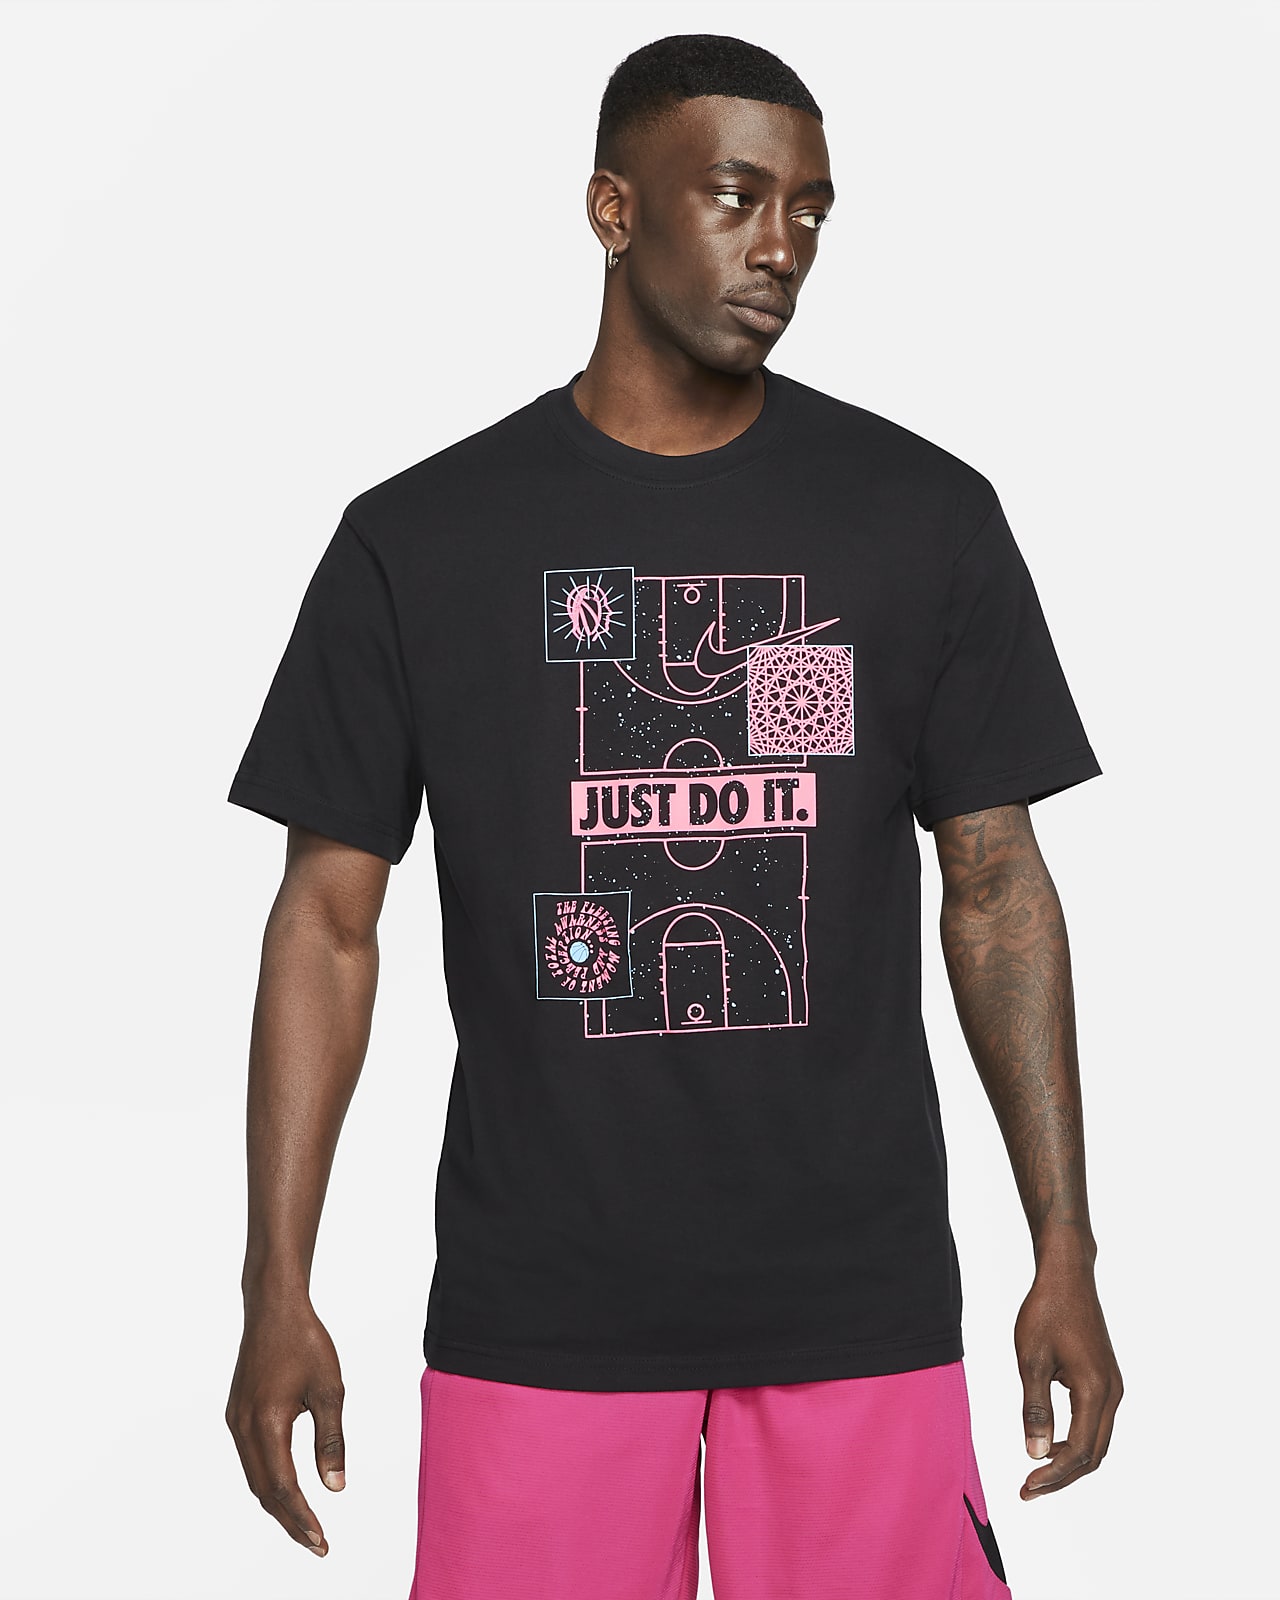 nike just do it muscle shirt